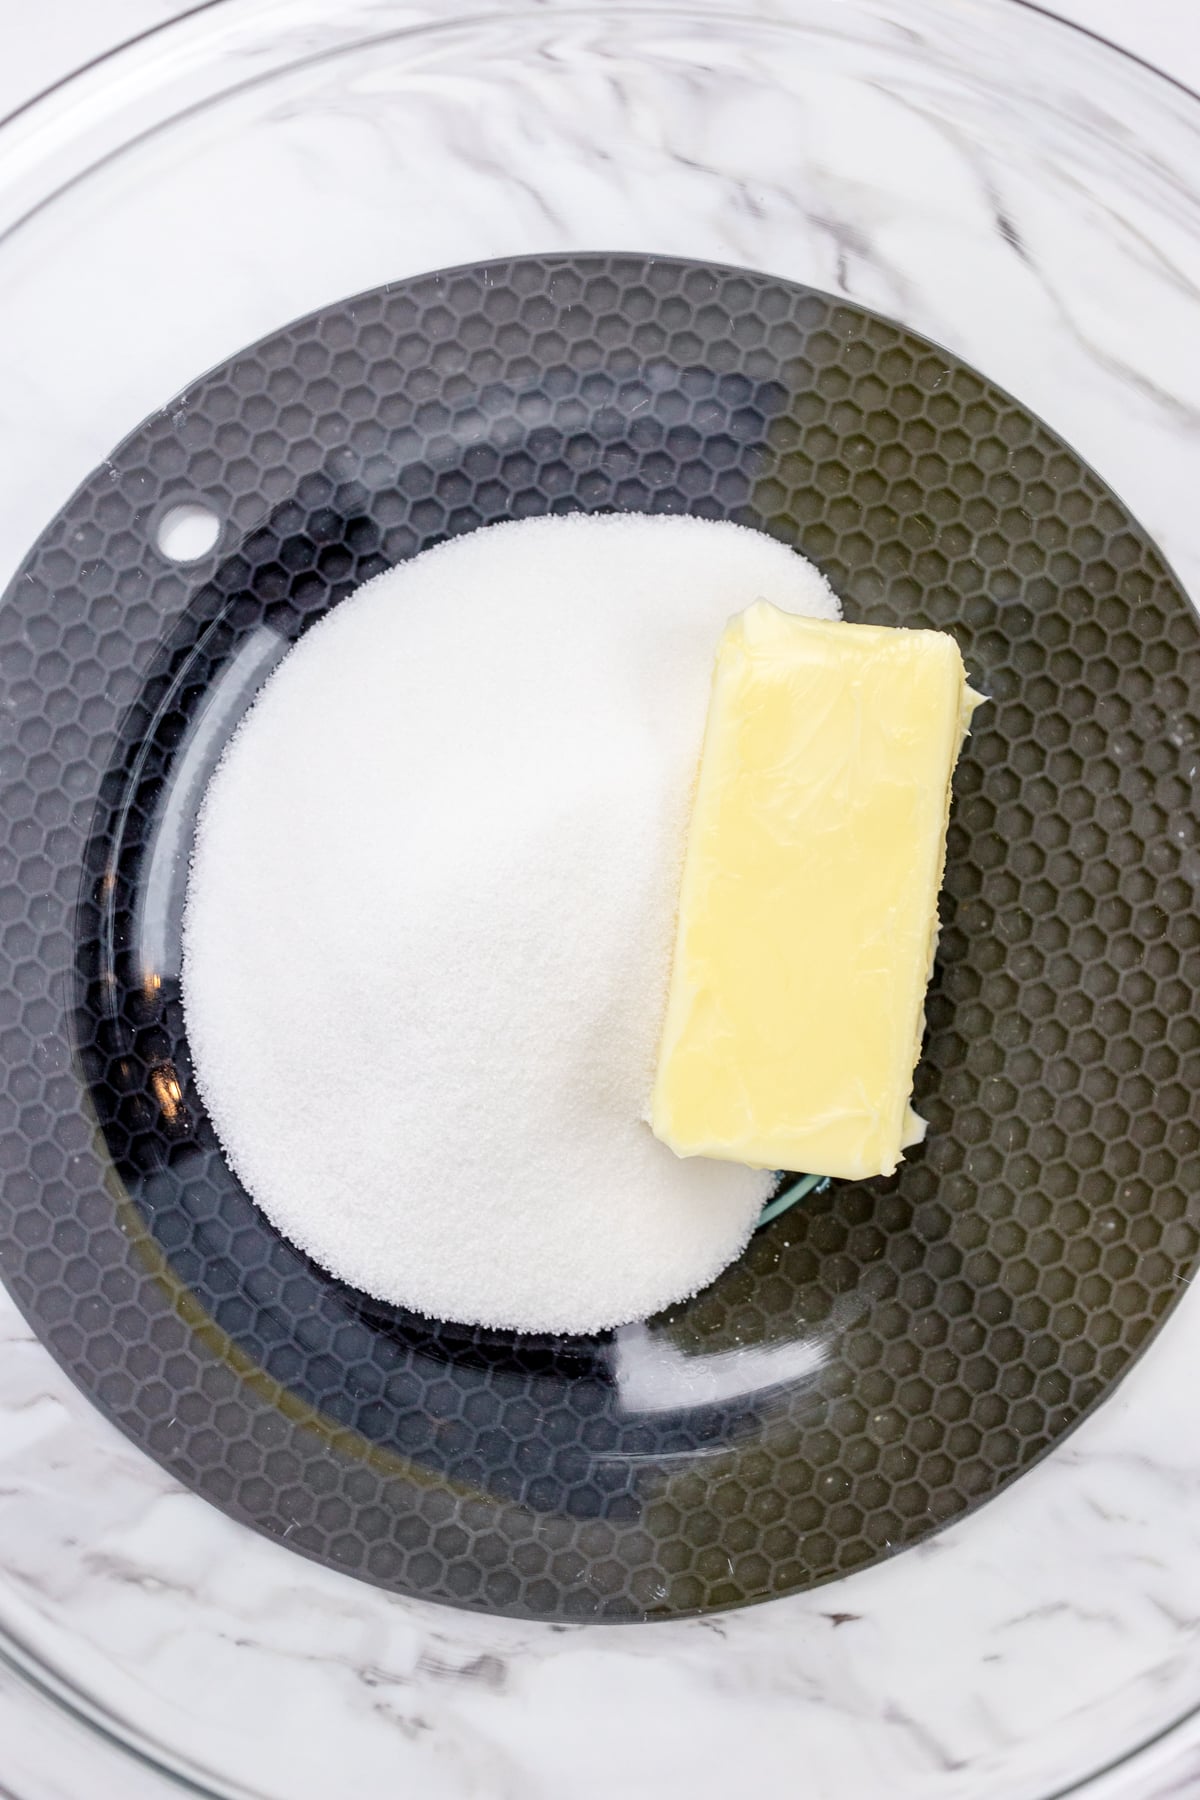 Top view of a mixing bowl with sugar and butter in it.